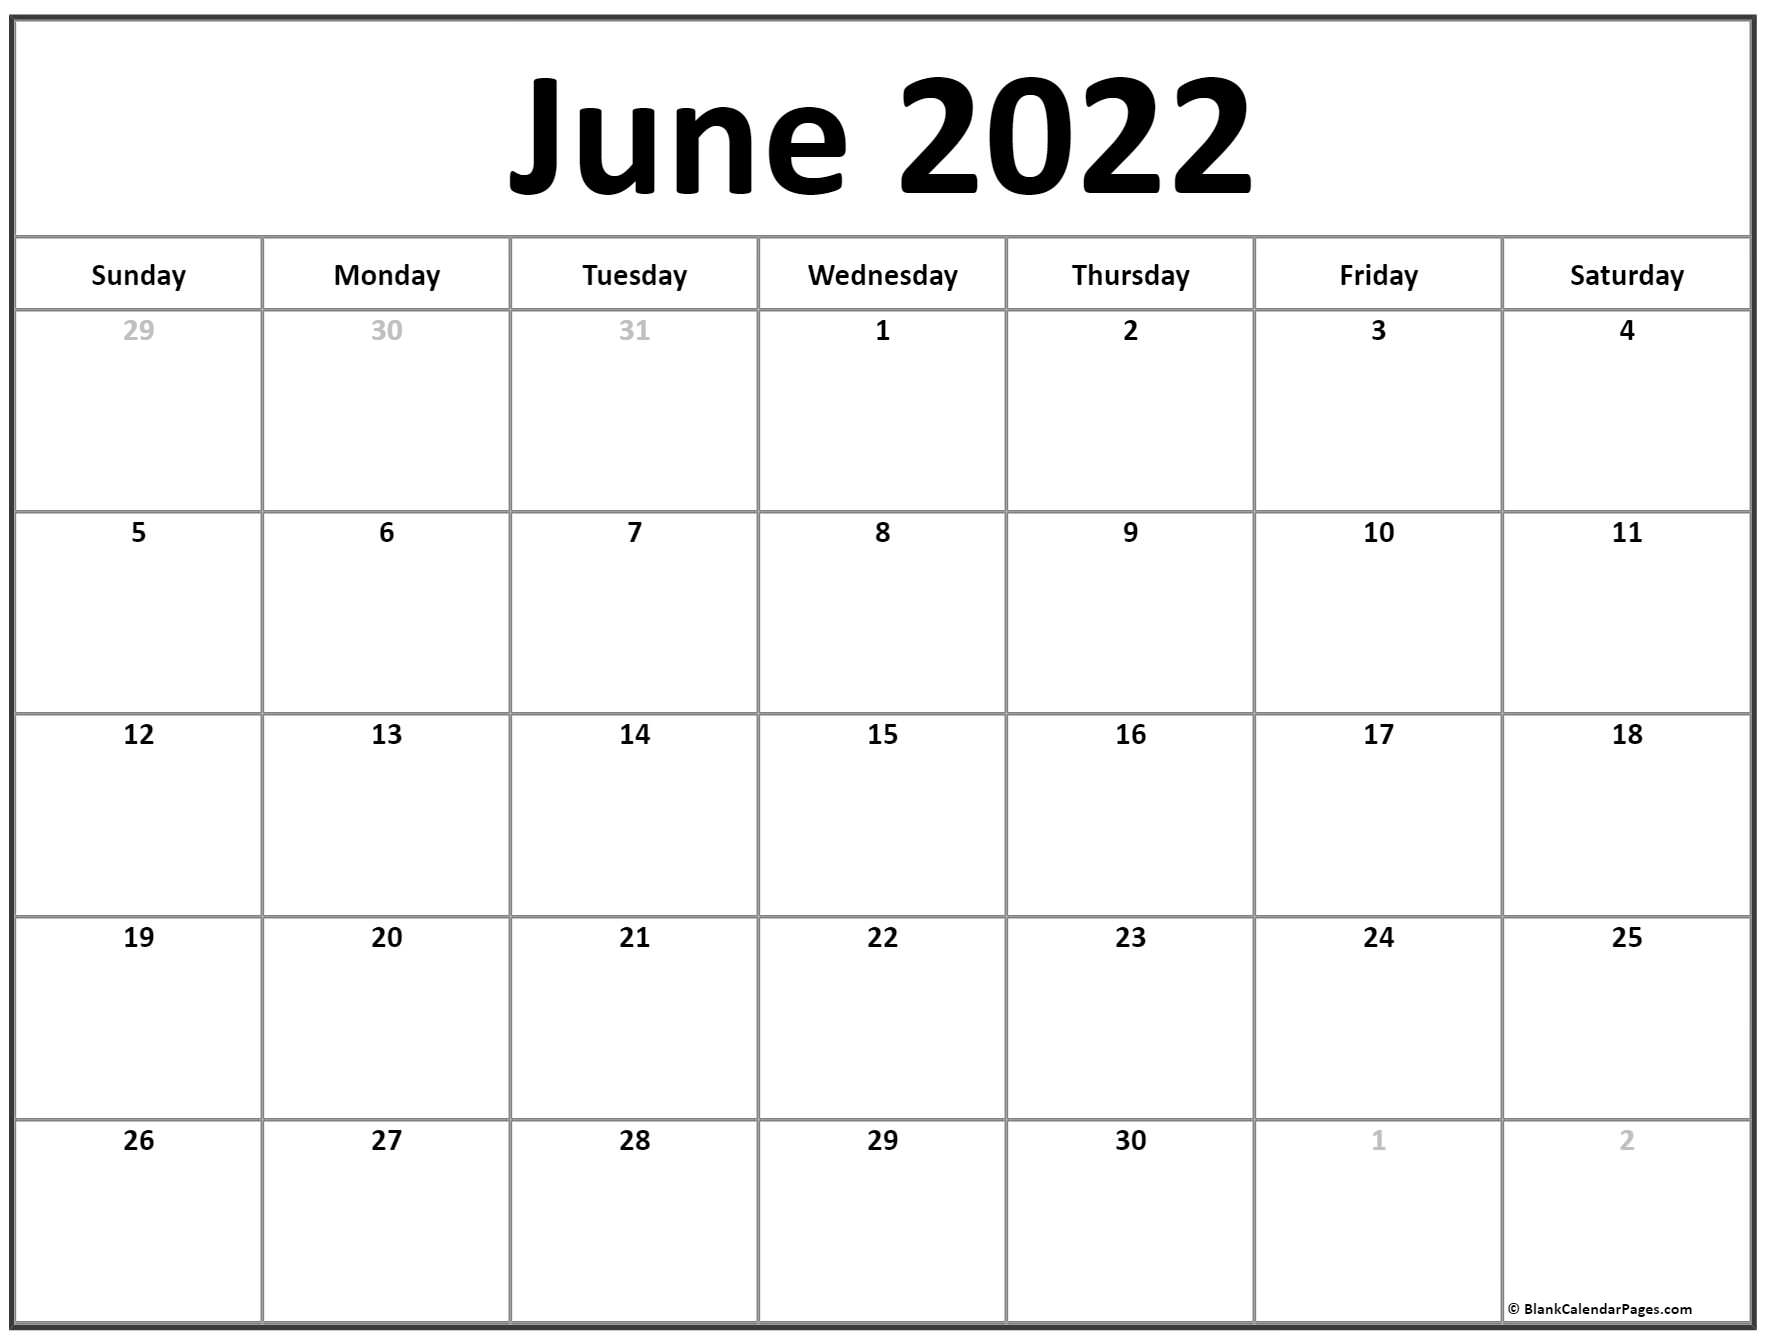 Take Calendar Page For June 2022